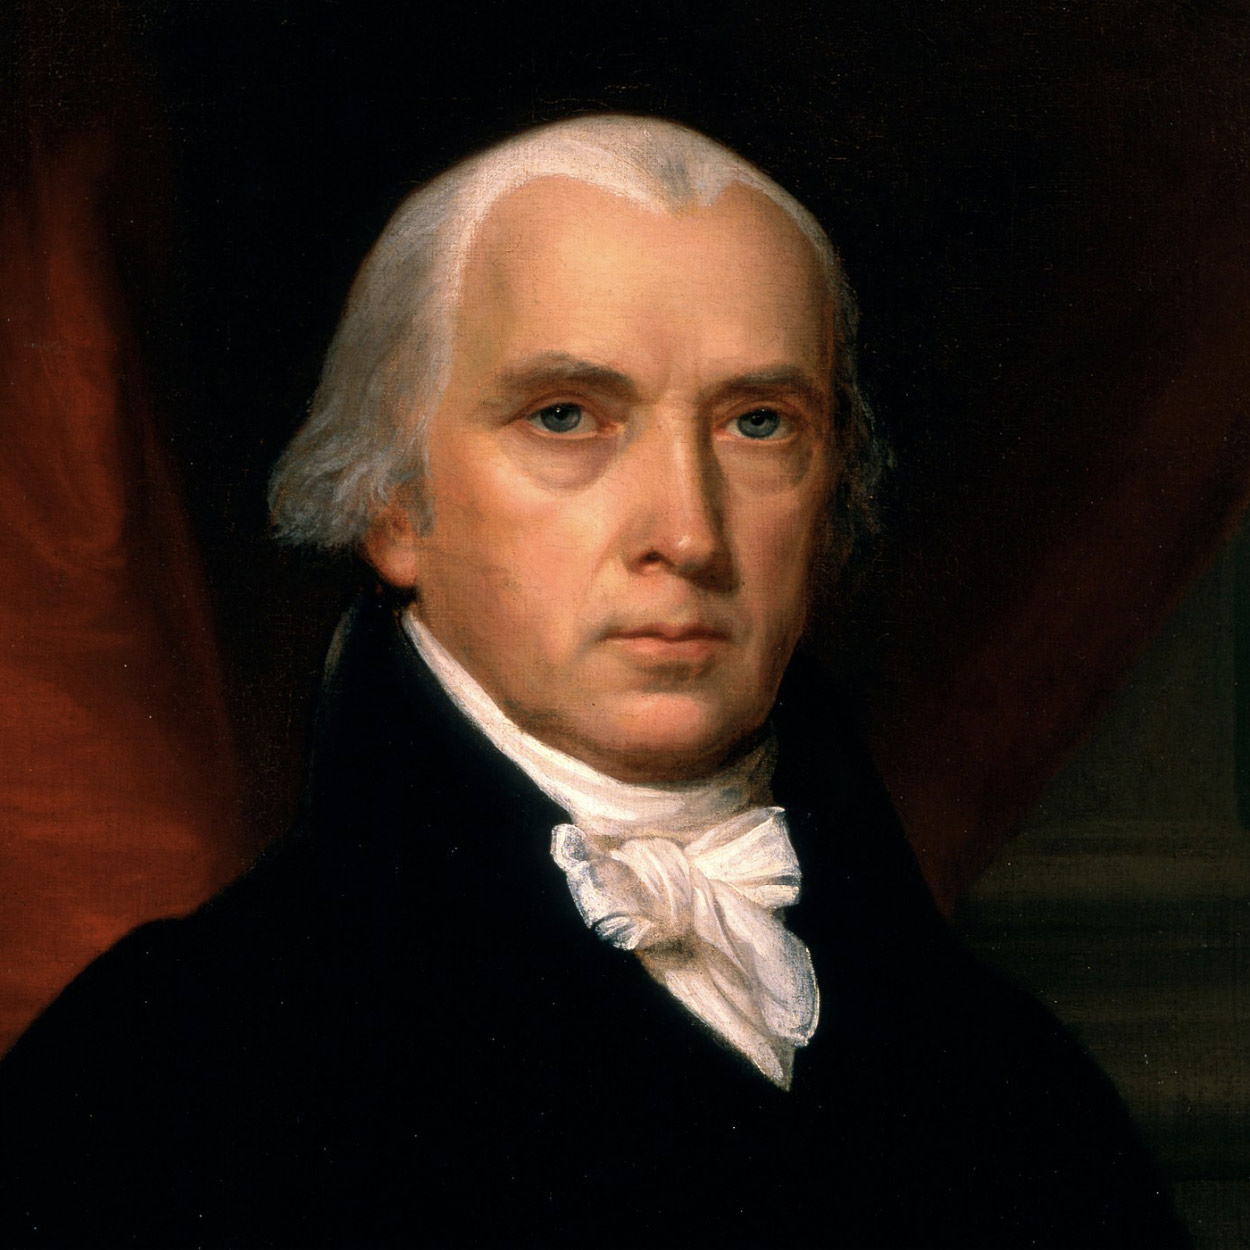 Absurd Historical Events - Back in the 1780’s, after being elected President, George Washington